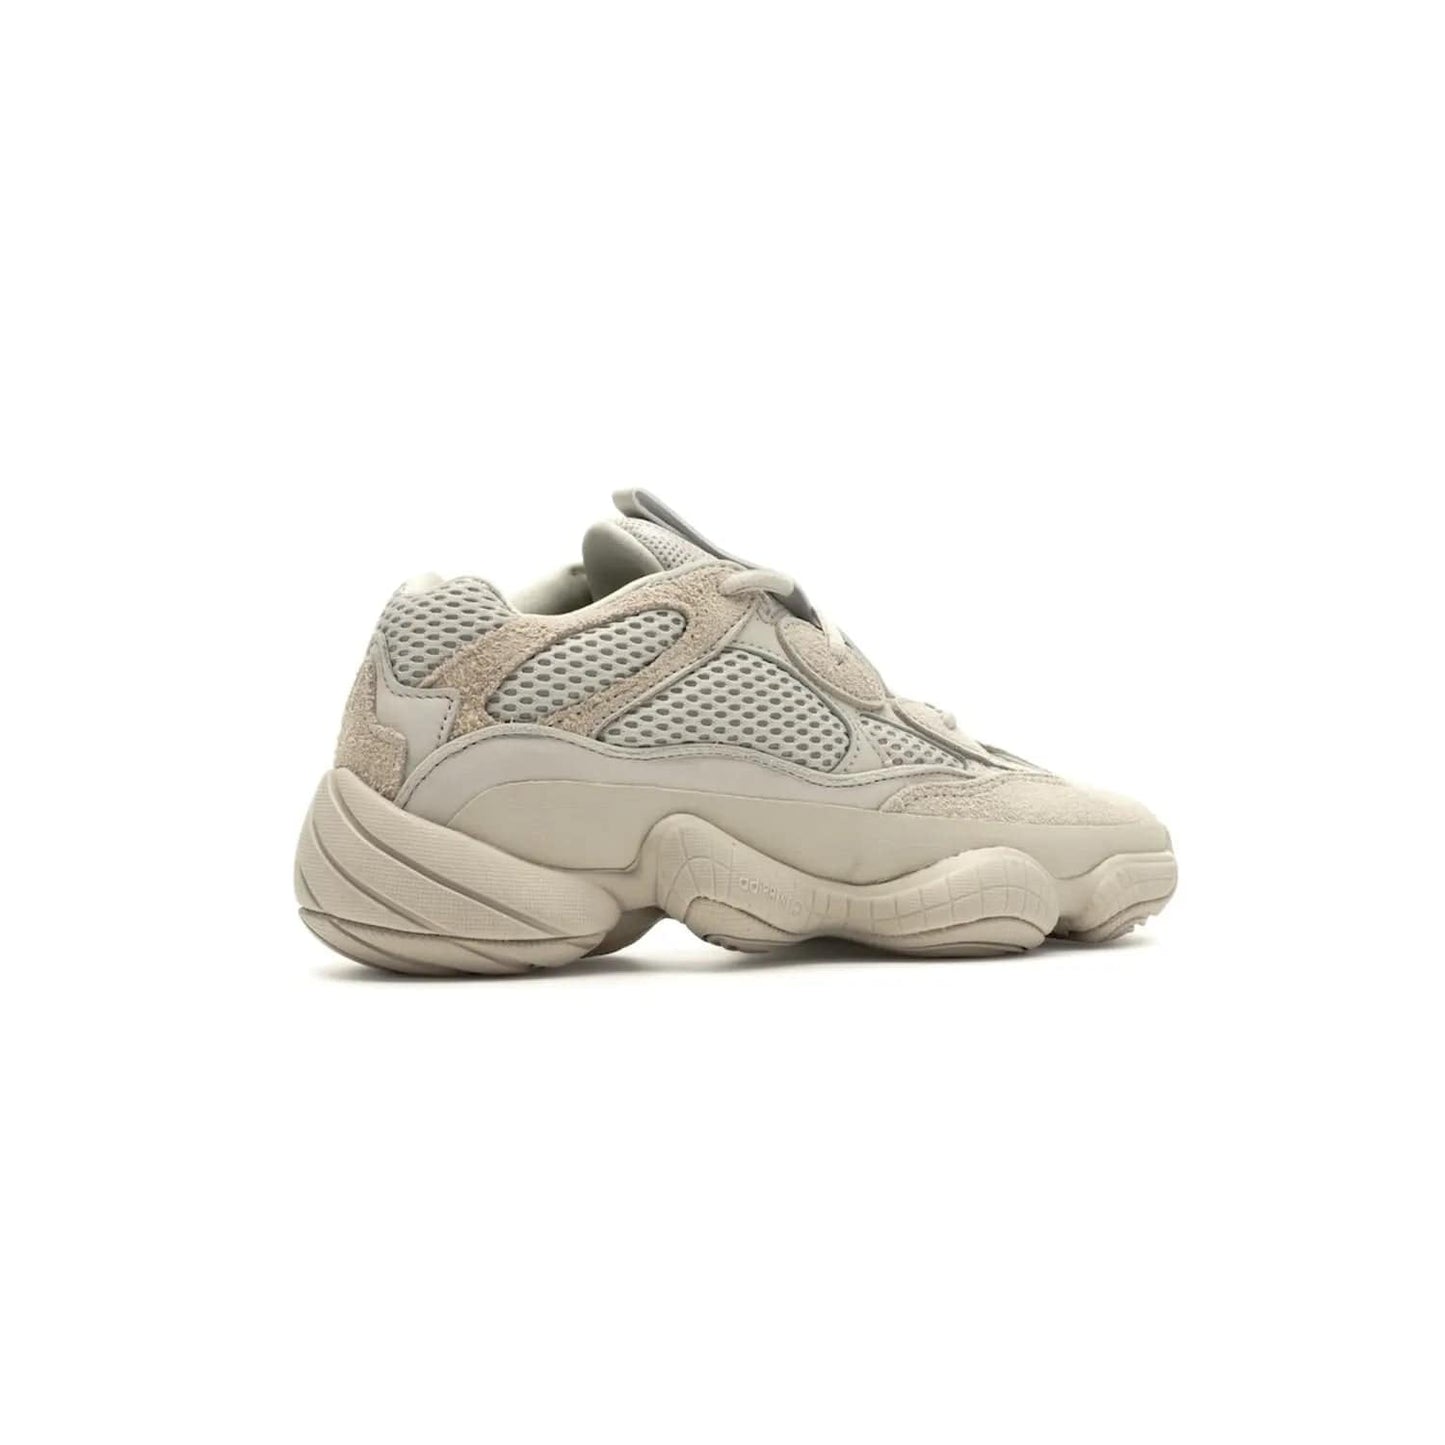 adidas Yeezy 500 Blush - Image 34 - Only at www.BallersClubKickz.com - Step up your sneaker game with the Adidas Yeezy 500 Blush. Monochromatic pale pink palette, hiking-inspired suede/mesh construction, plus adiPRENE sole for comfort and performance. Get the Adidas Yeezy 500 and experience true style and comfort.